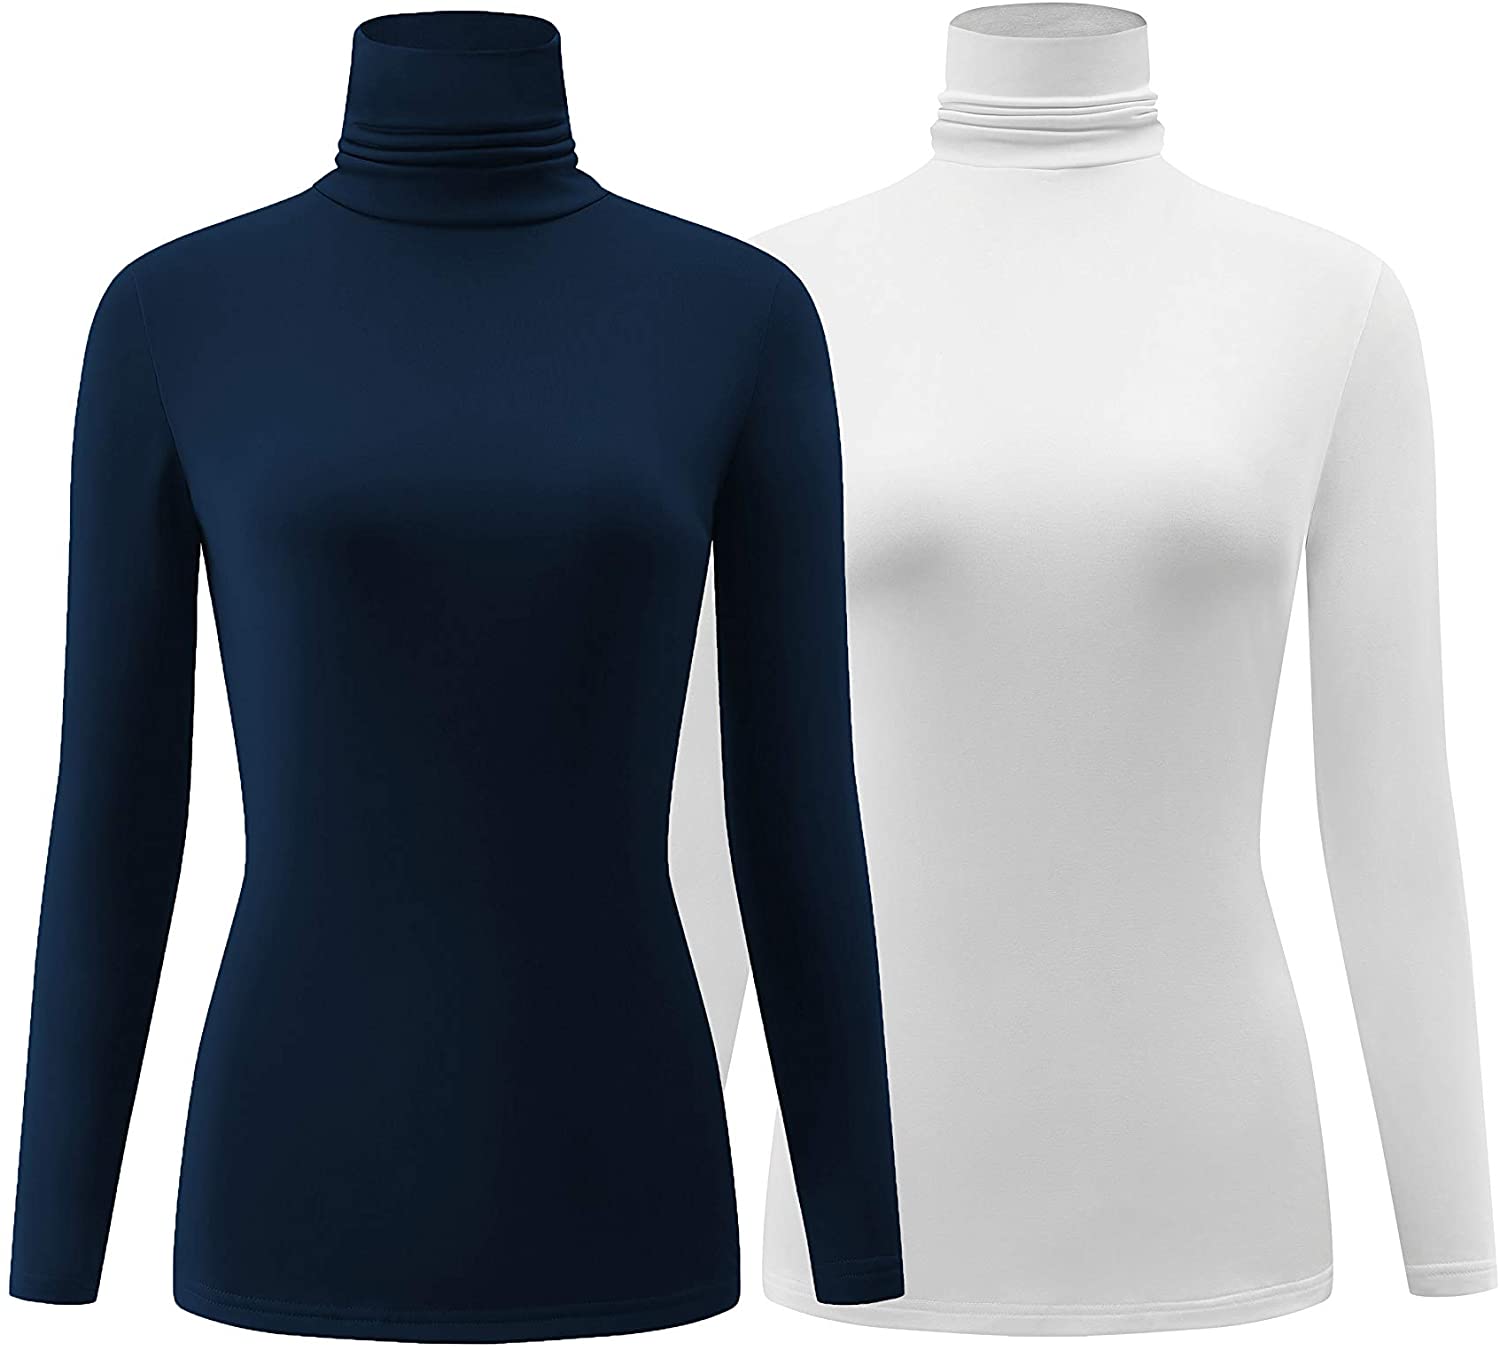 KLOTHO Casual Turtleneck Tops Lightweight Long Sleeve Soft Thermal Shirts for Women